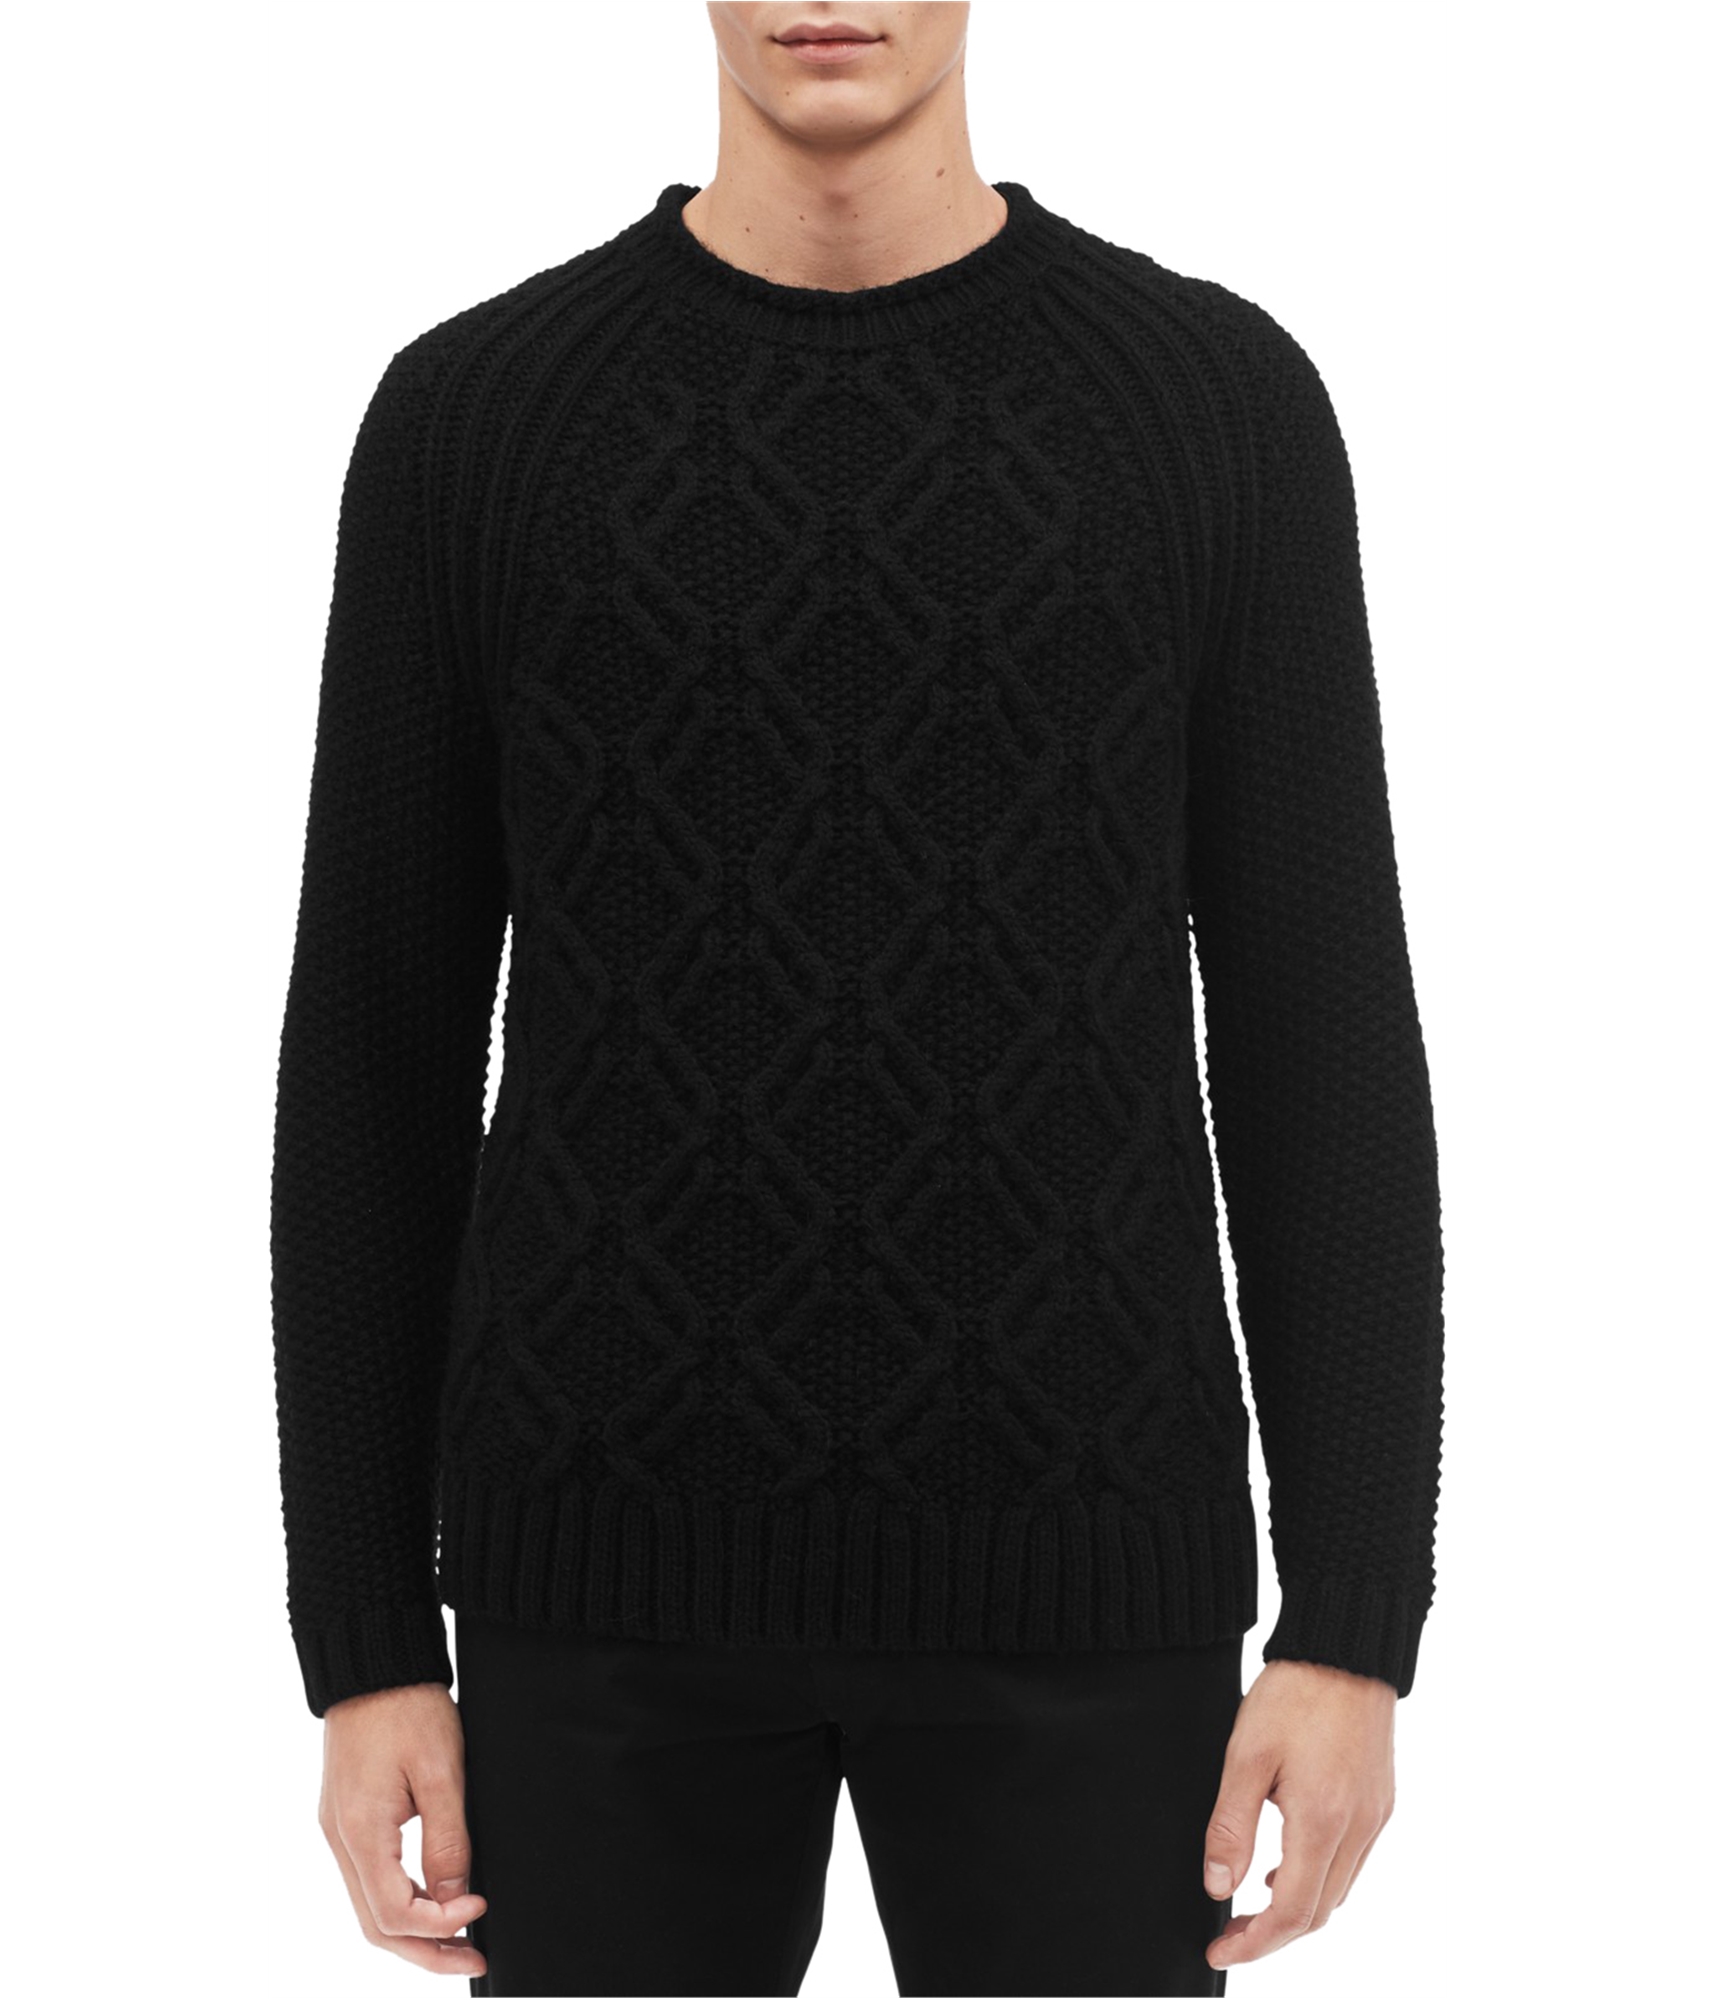 Calvin Klein Mens Cable Knit Sweater | eBay